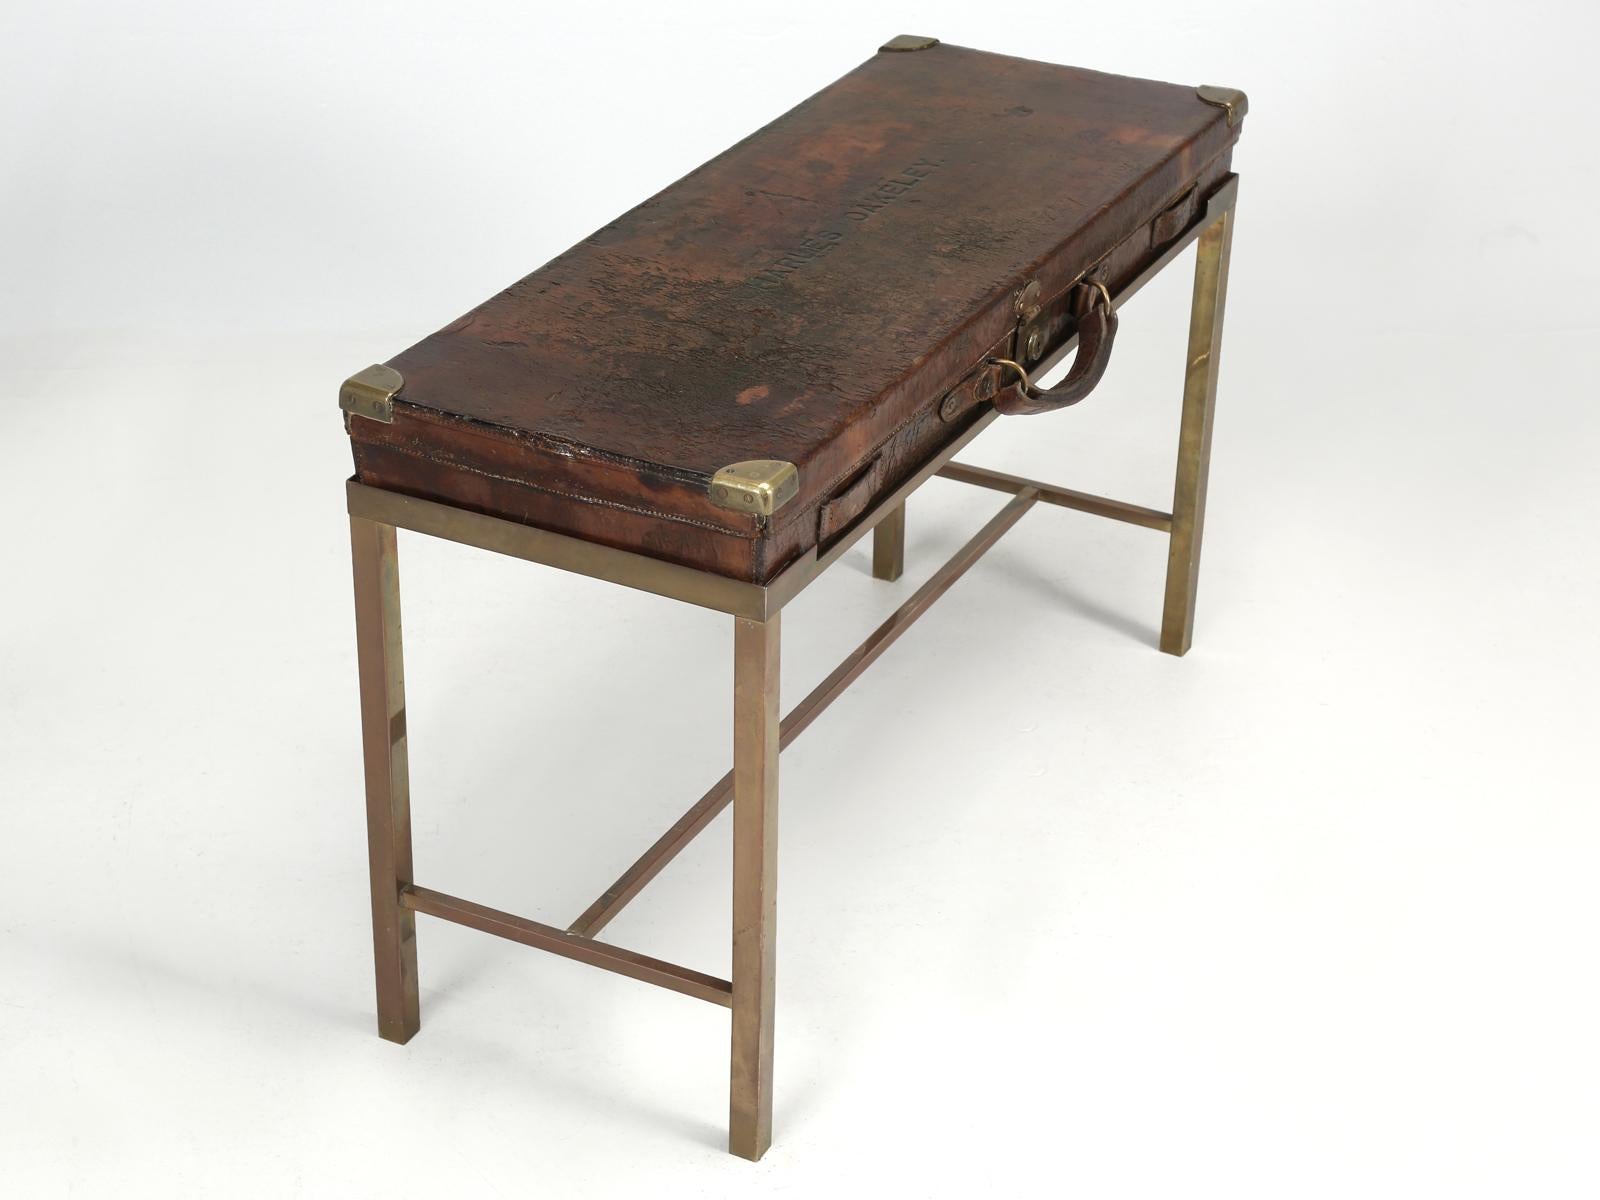 Country Antique William and Evans Leather Gun Case End Table with Brass Legs, c1900-1920 For Sale